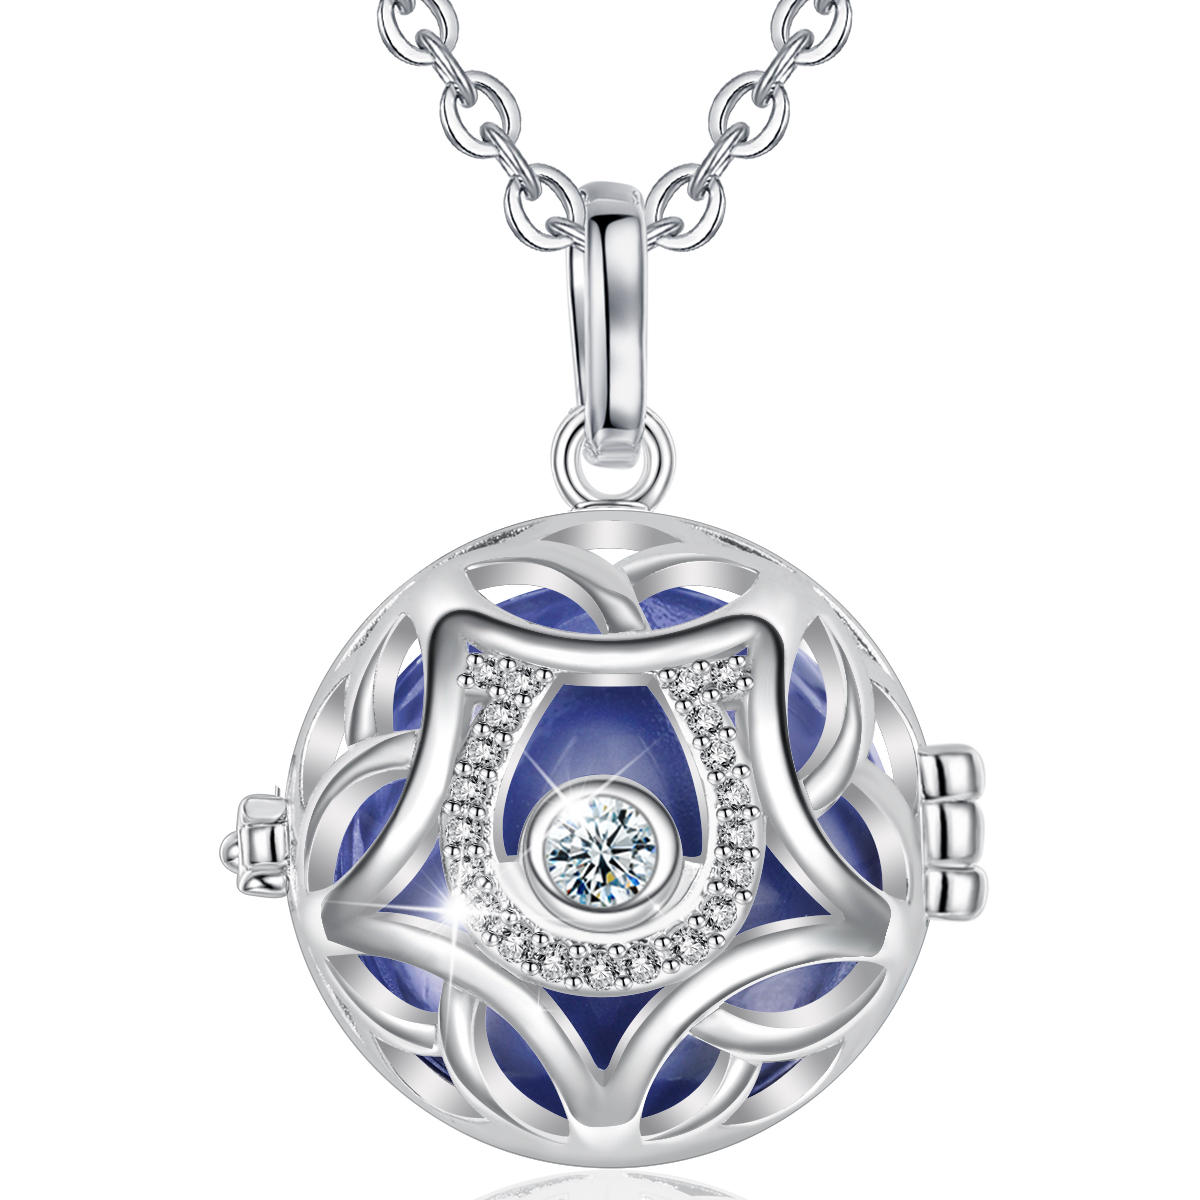 Pentagram Pattern Large Hollow Cage Mexican Chime Magic Box Bola Sound Bell Ball Pendant Pregnancy Necklace